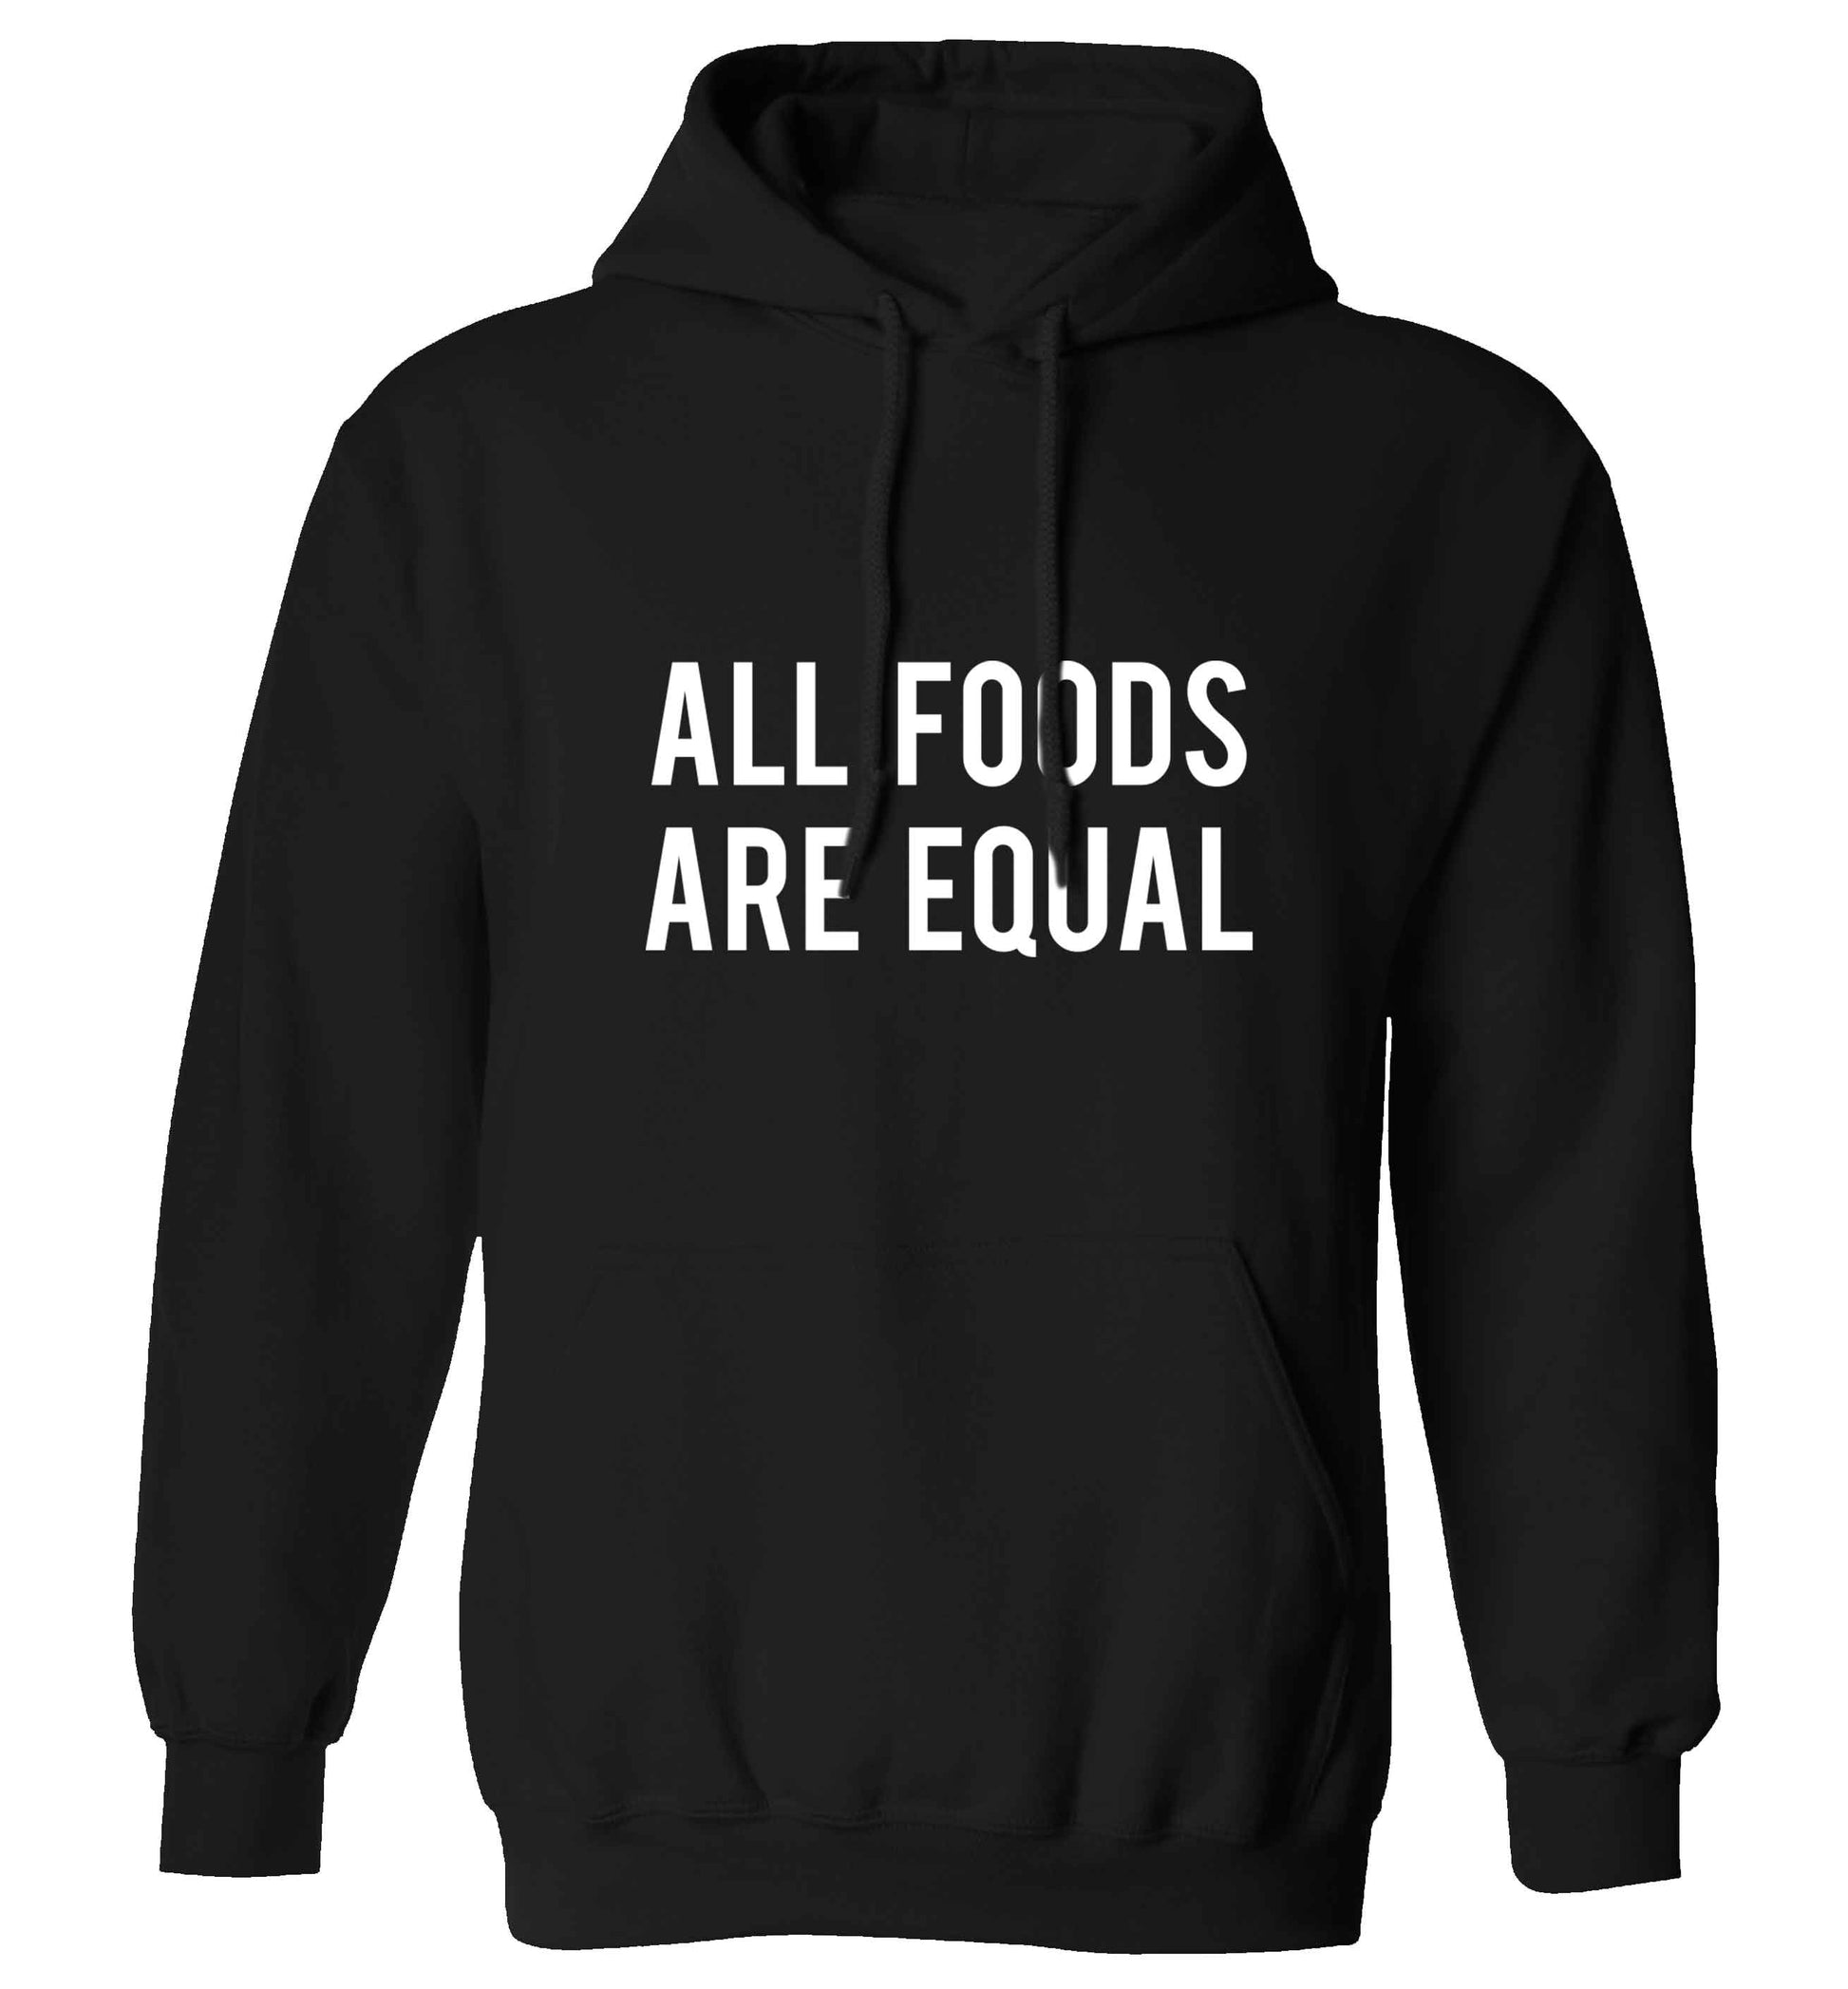 All foods are equal adults unisex black hoodie 2XL